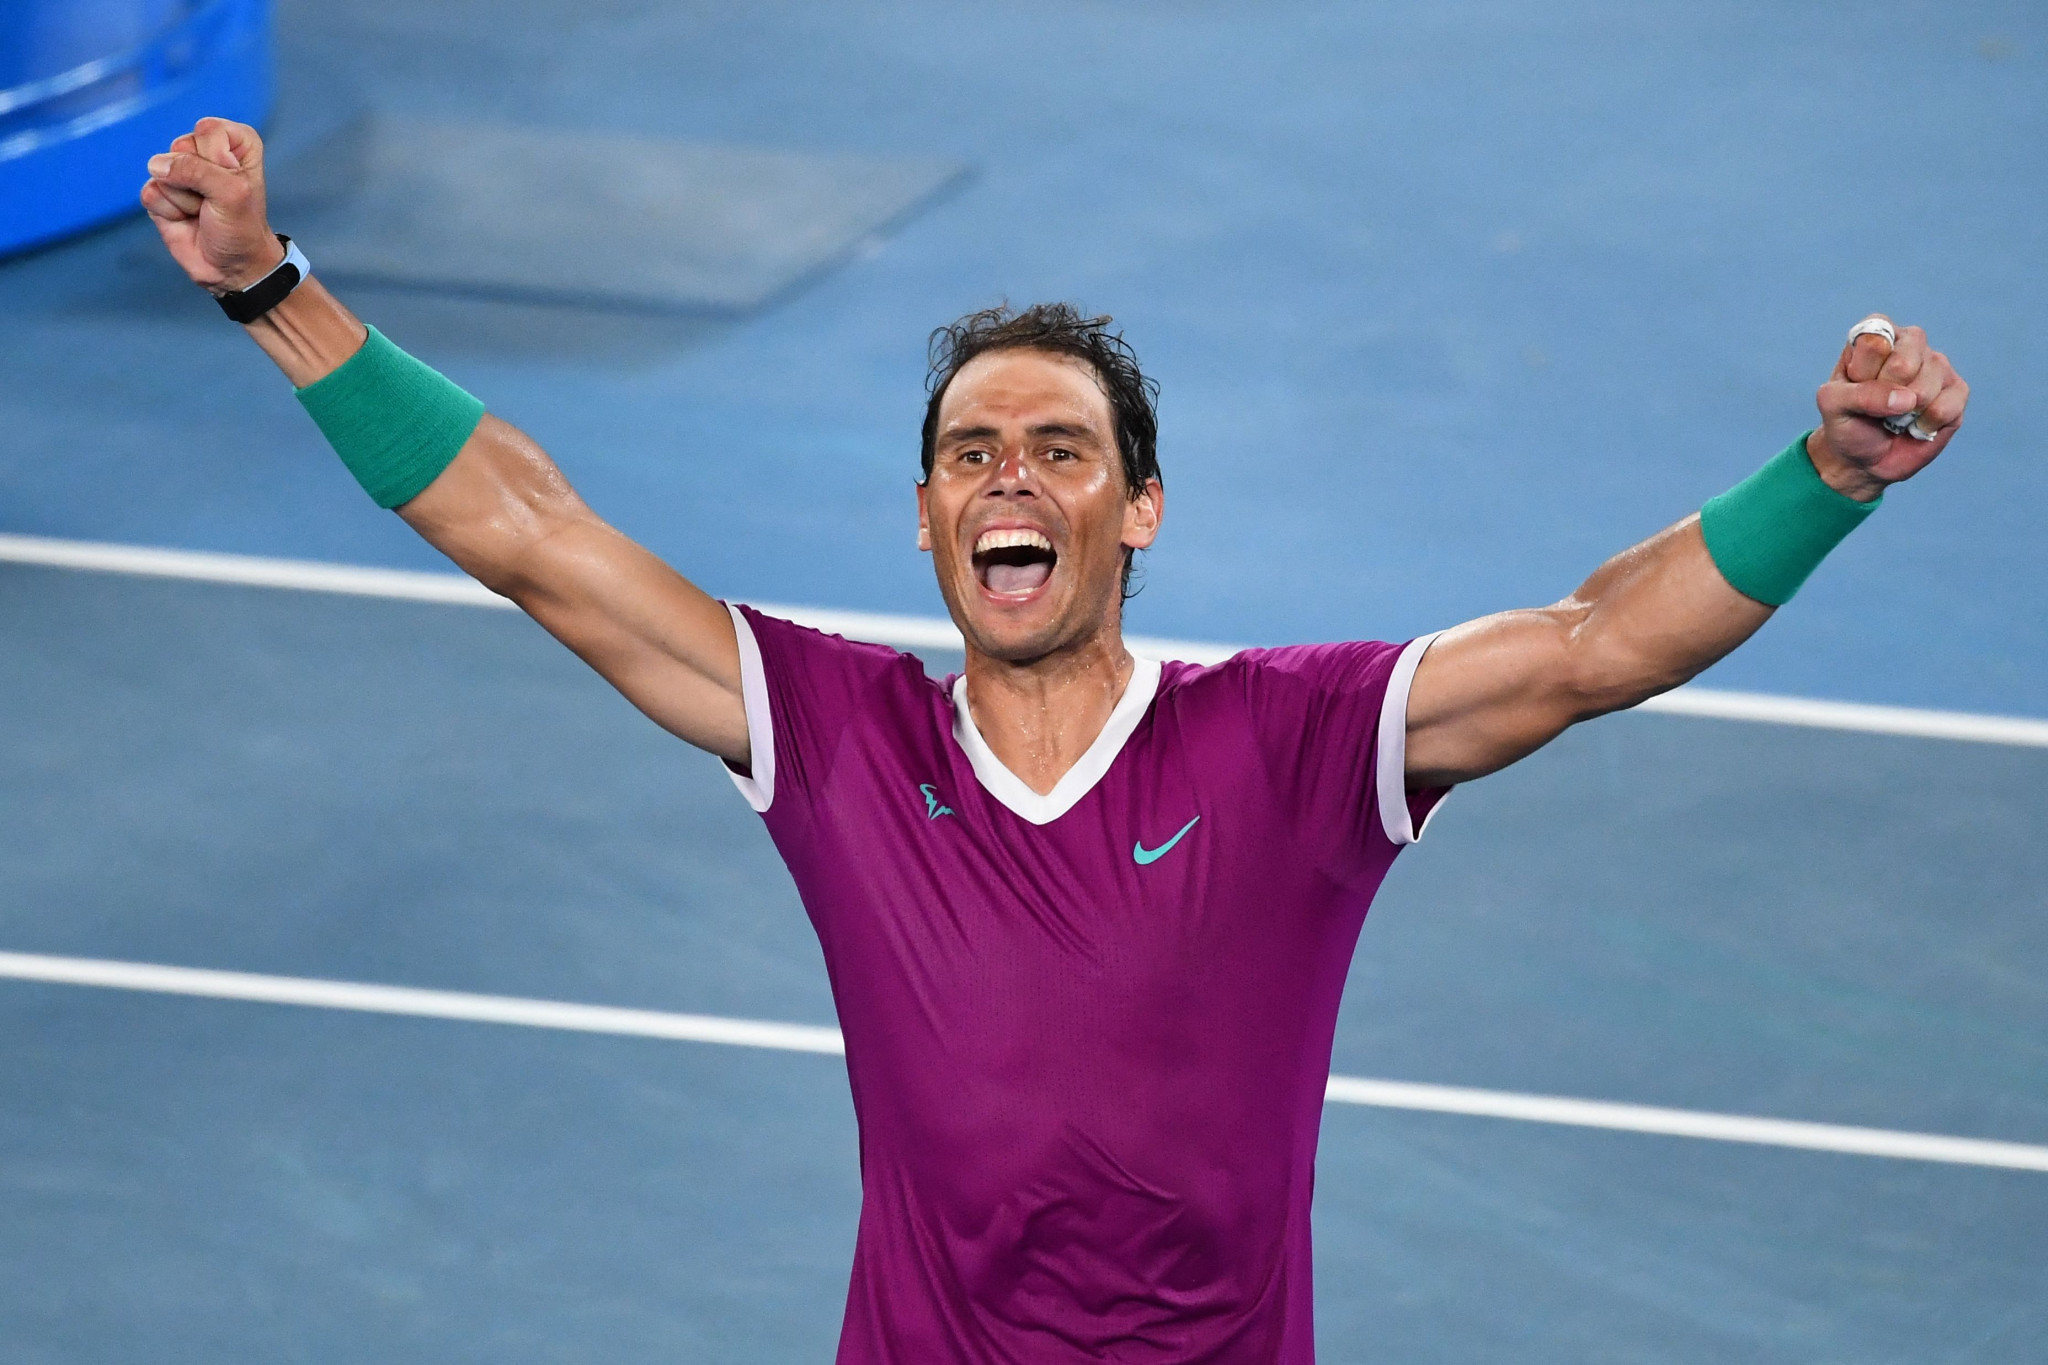 Nadal has now moved on to 21 men's singles Grand Slam titles after his victory in Melbourne ©Getty Images